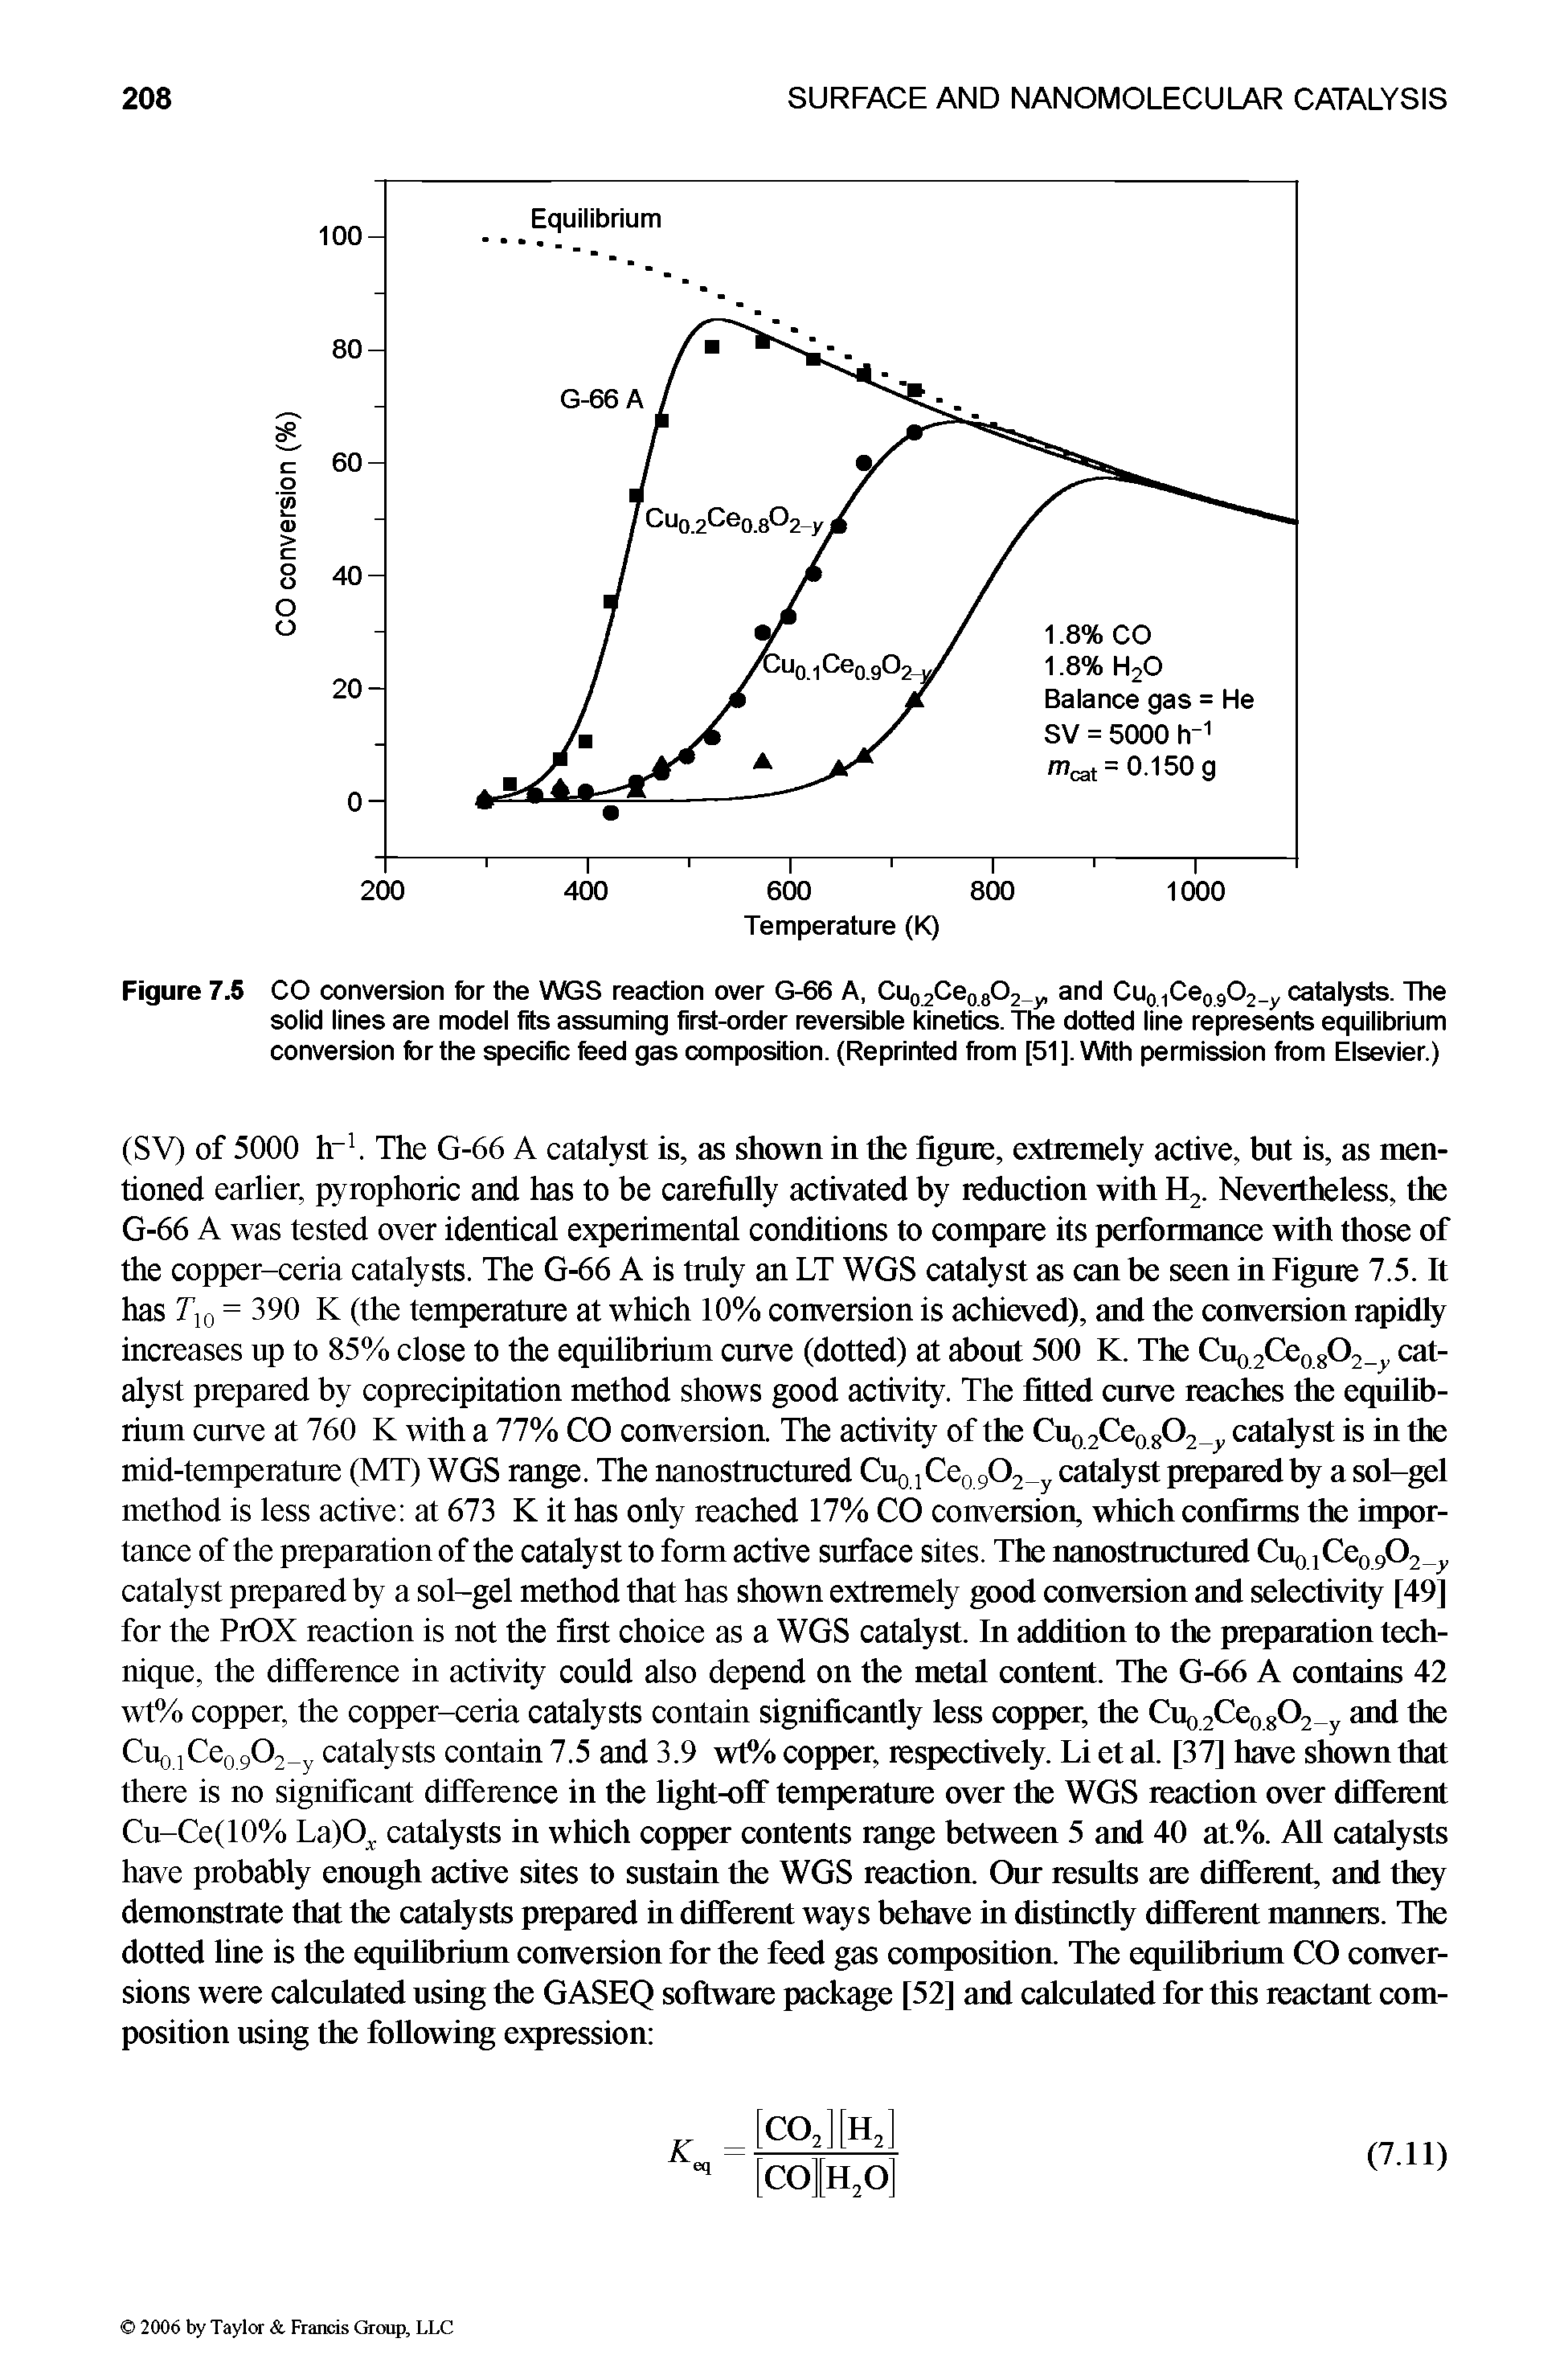 Figure 7.5 CO conversion for the WGS reaction over G-66 A, Cu02Ce08O2 y and Cu01Ce09O2 y catalysts. The solid lines are model fits assuming first-order reversible kinetics. The dotted line represents equilibrium conversion for the specific feed gas composition. (Reprinted from [51]. With permission from Elsevier.)...